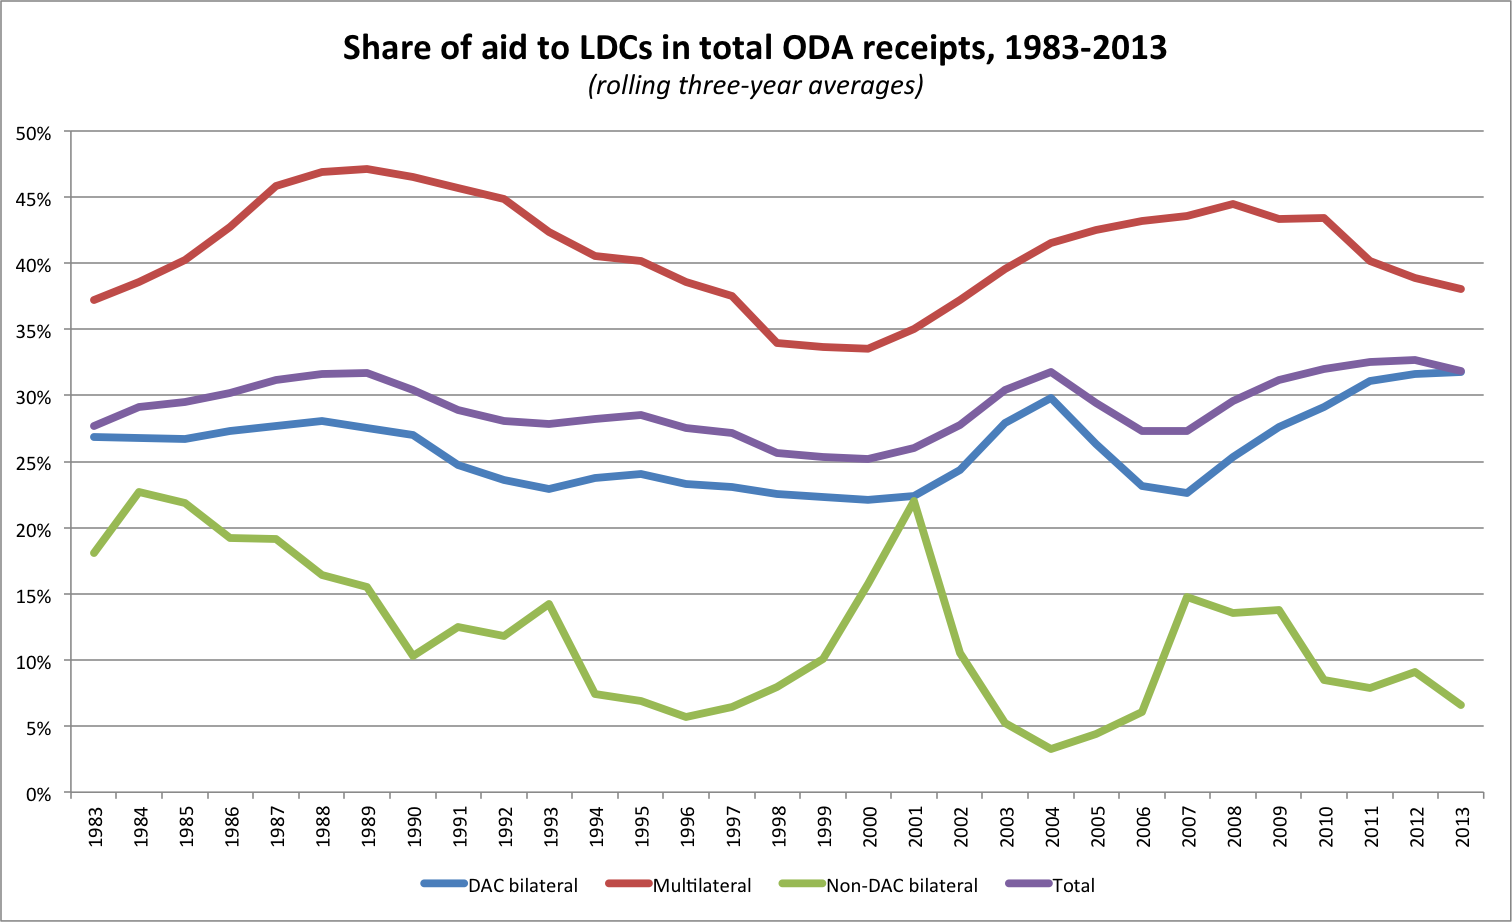 Share of aid to LDCs in total ODA receipts, 1983-2013